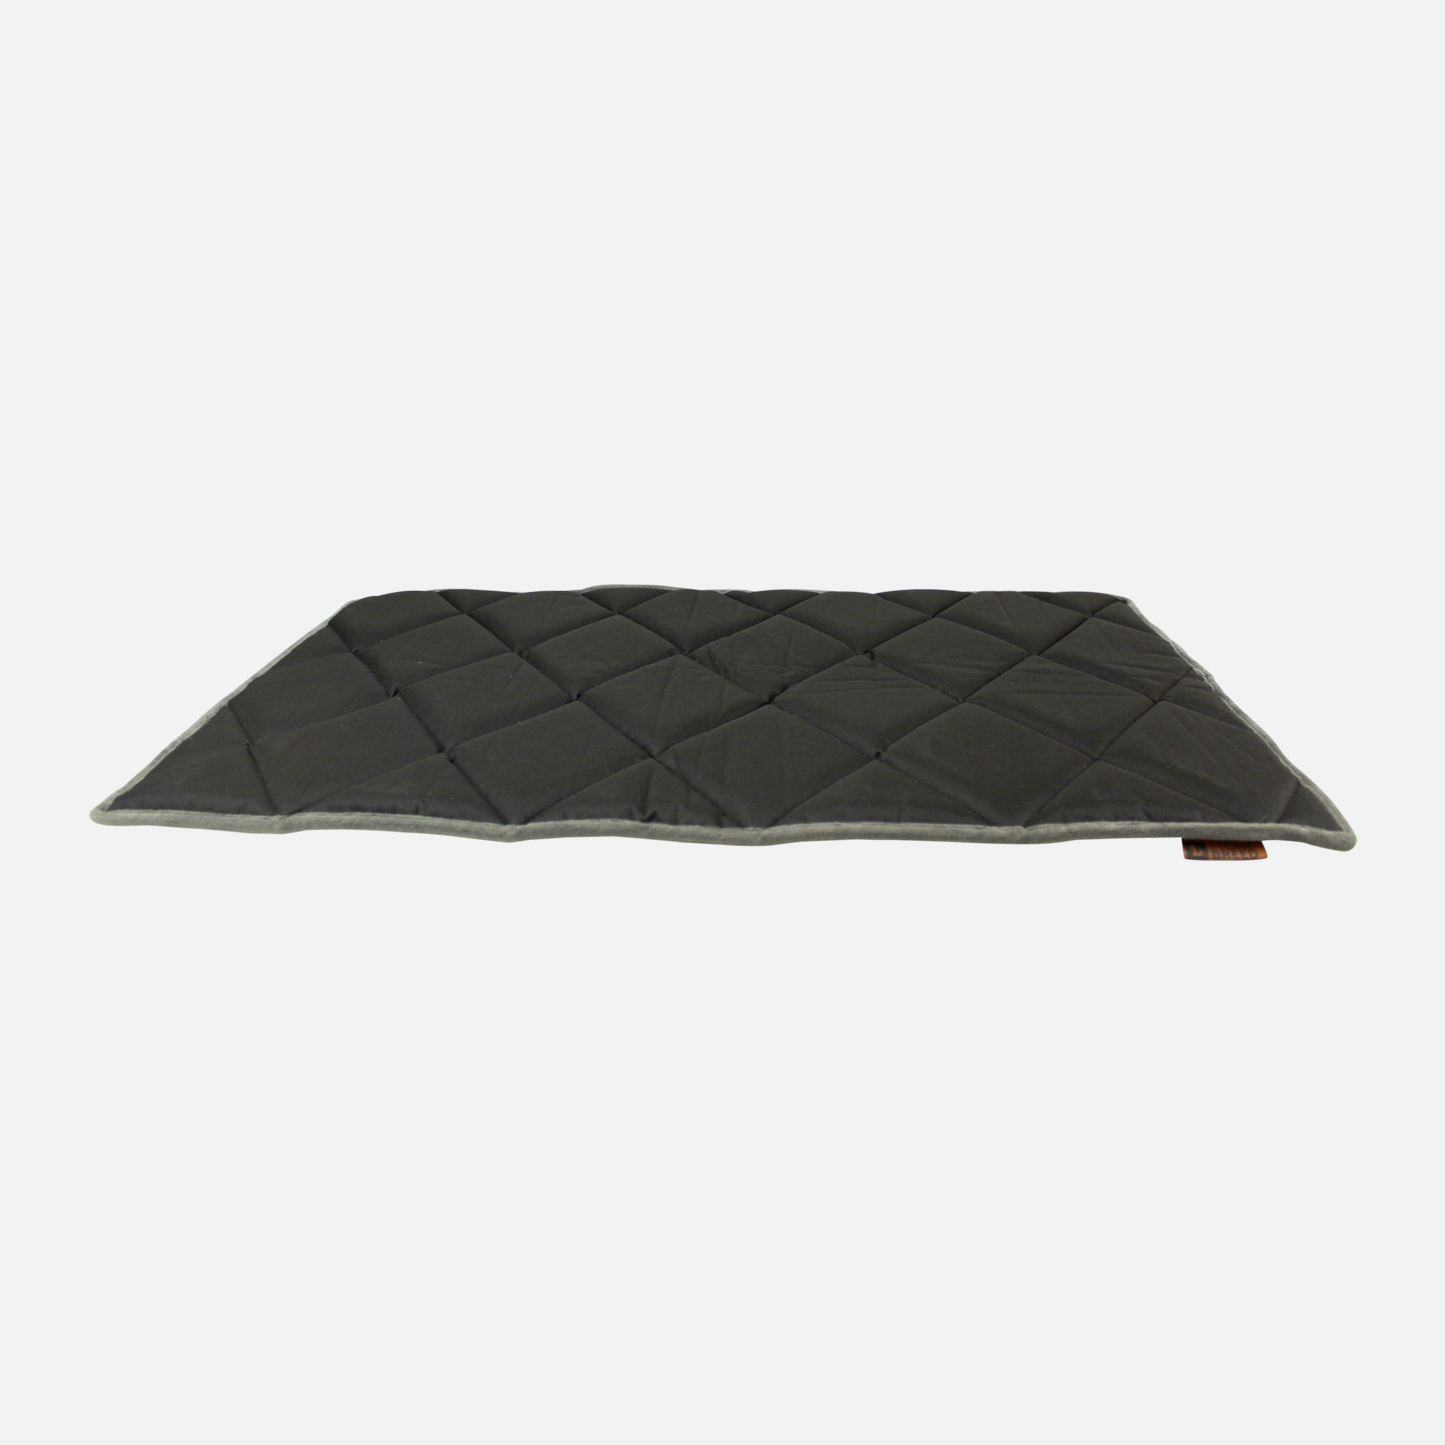 Crate mat bed for dog, dark gray